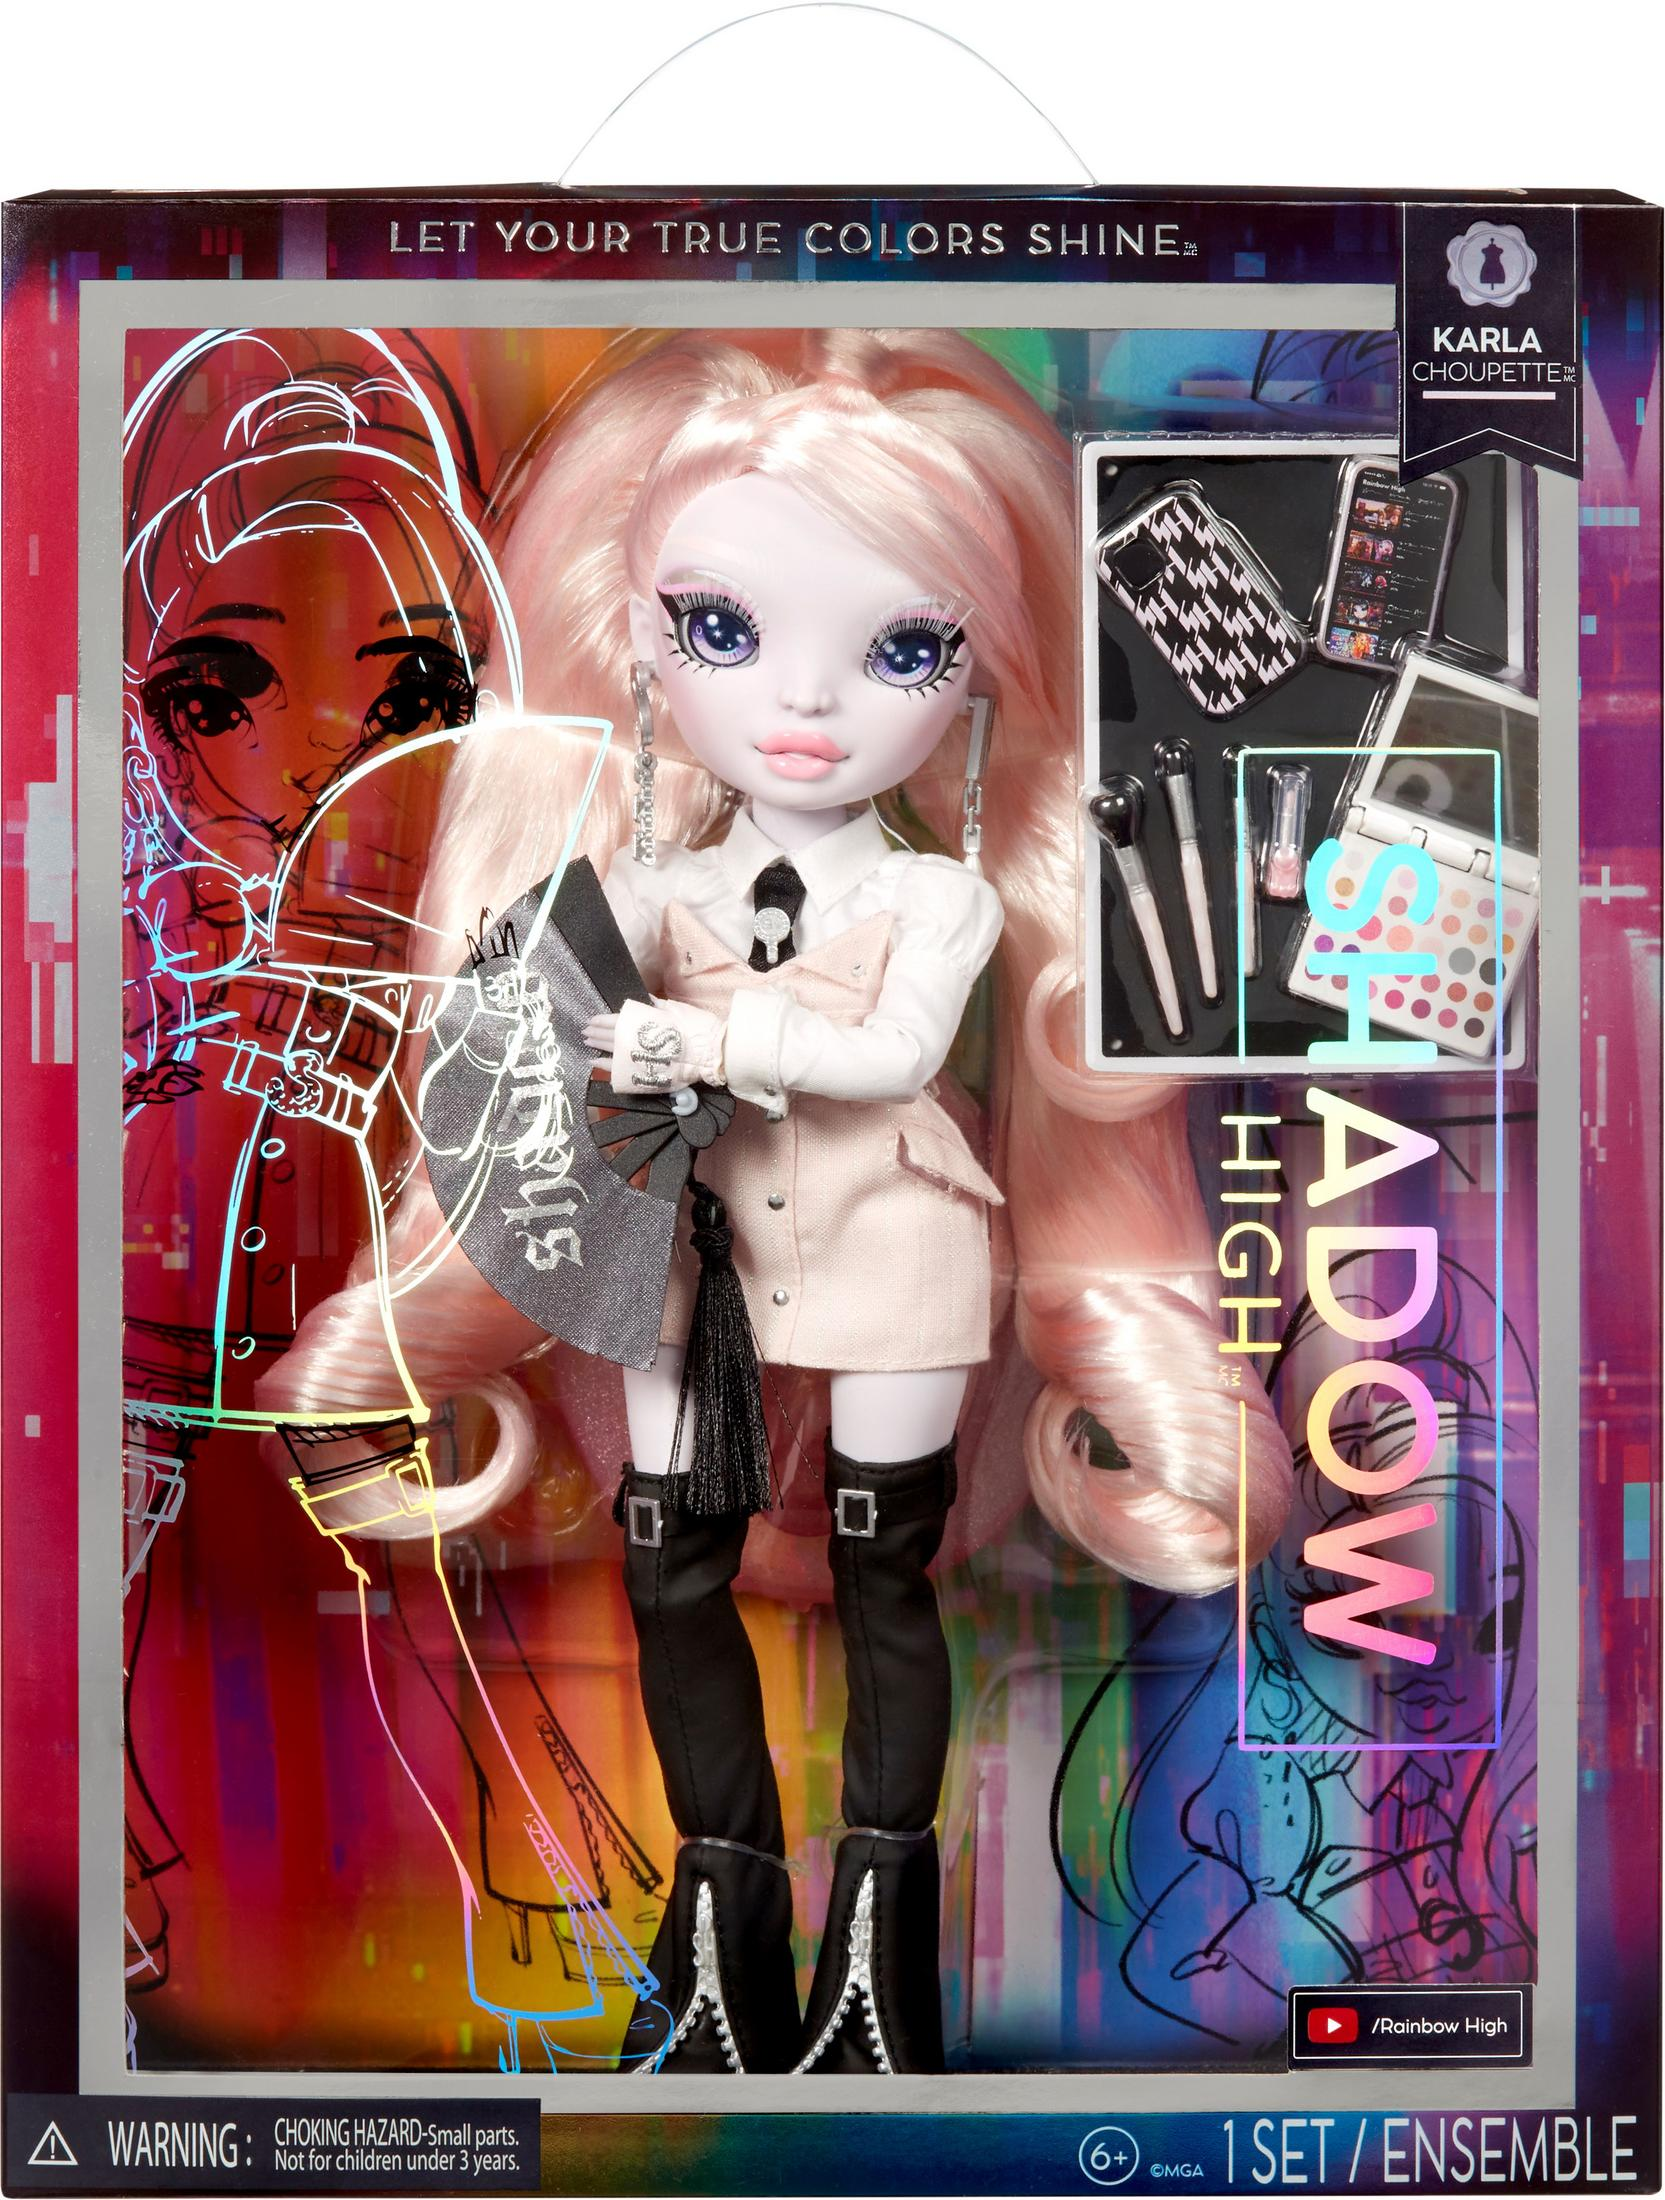 CARAMEL 583042 Spielzeugpuppe MGA Rosa 8X26.5G HIGH ENTERTAINMENT DOLL-IP (PINK) FASHION